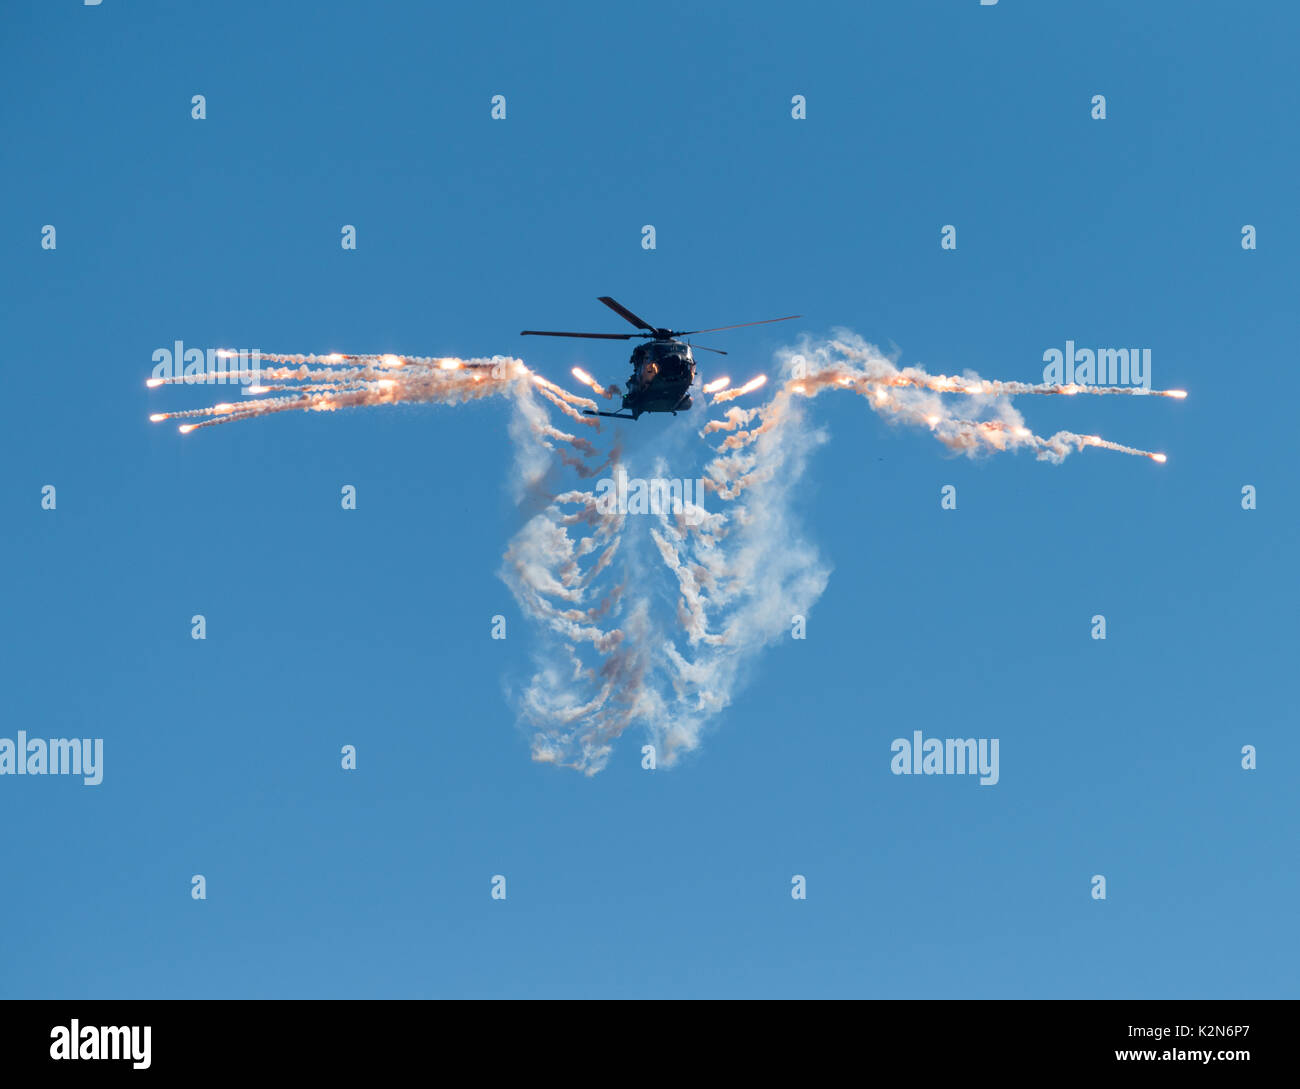 Helsinki, Finland - 9 June 2017: Finnish Army NH90 helicopter shooting out flares at the Kaivopuisto Air Show in Helsinki, Finland on 9 June 2017. Stock Photo